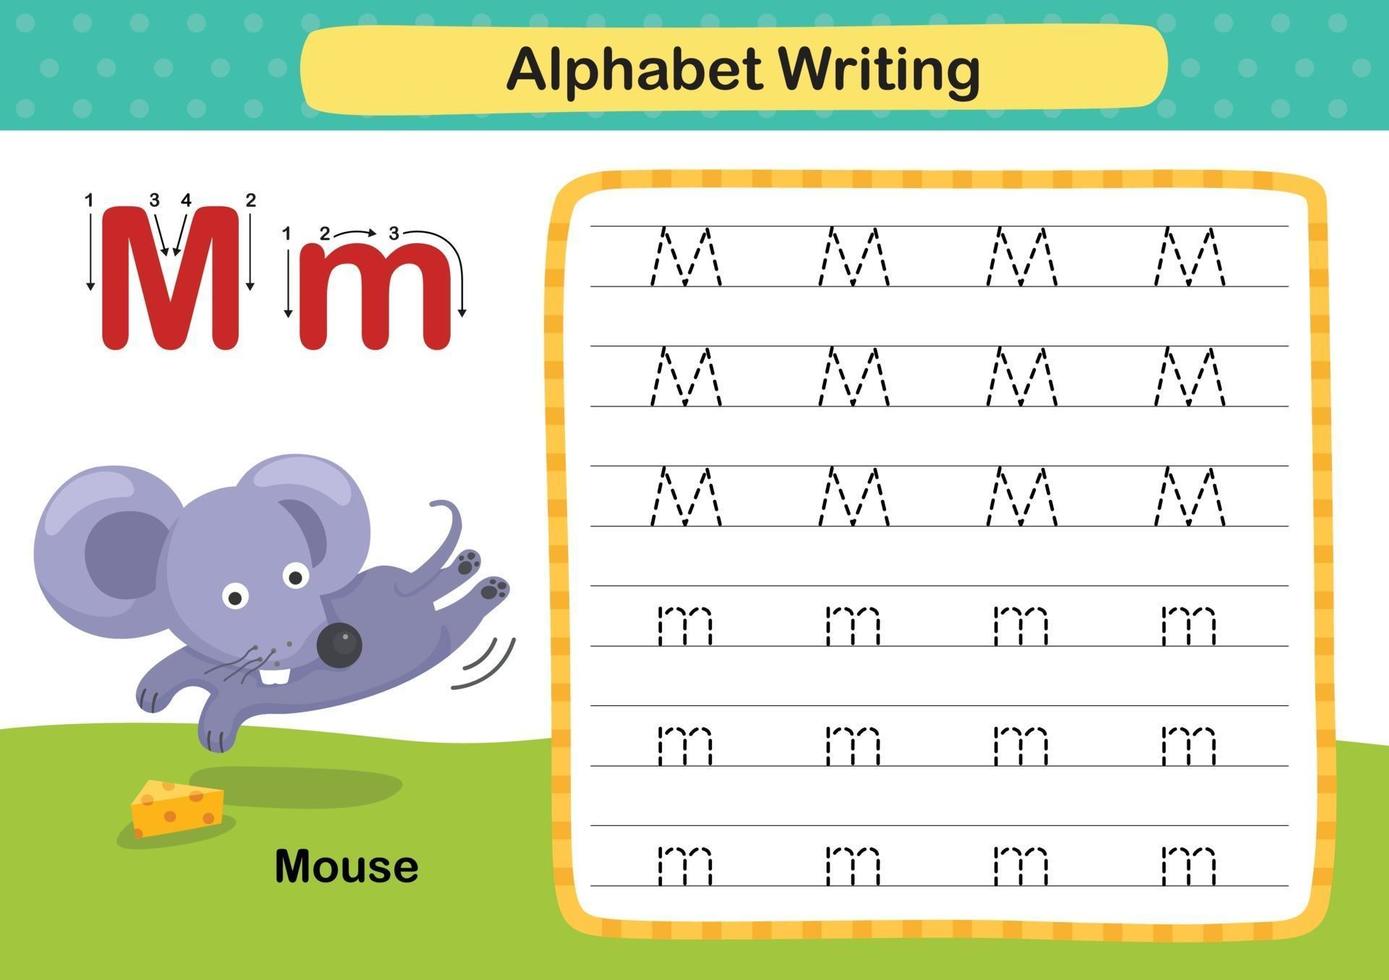 Alphabet Letter M-Mouse exercise with cartoon vocabulary illustration, vector